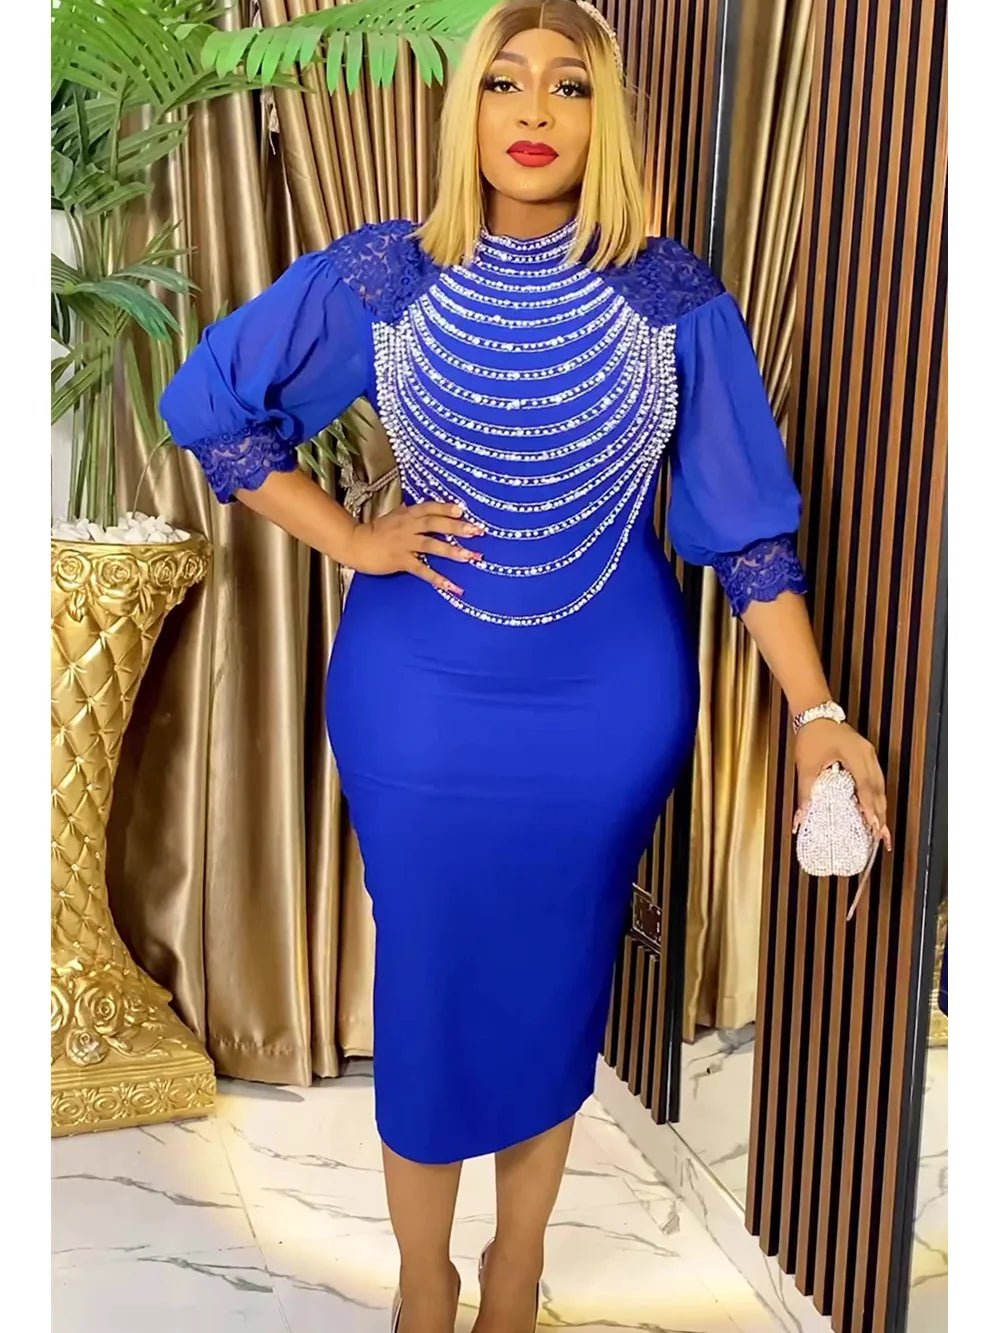 Plus Size Luxury Evening Dresses: African Inspired Robes for Wedding Parties, Featuring Dashiki - Flexi Africa - Flexi Africa offers Free Delivery Worldwide - Vibrant African traditional clothing showcasing bold prints and intricate designs